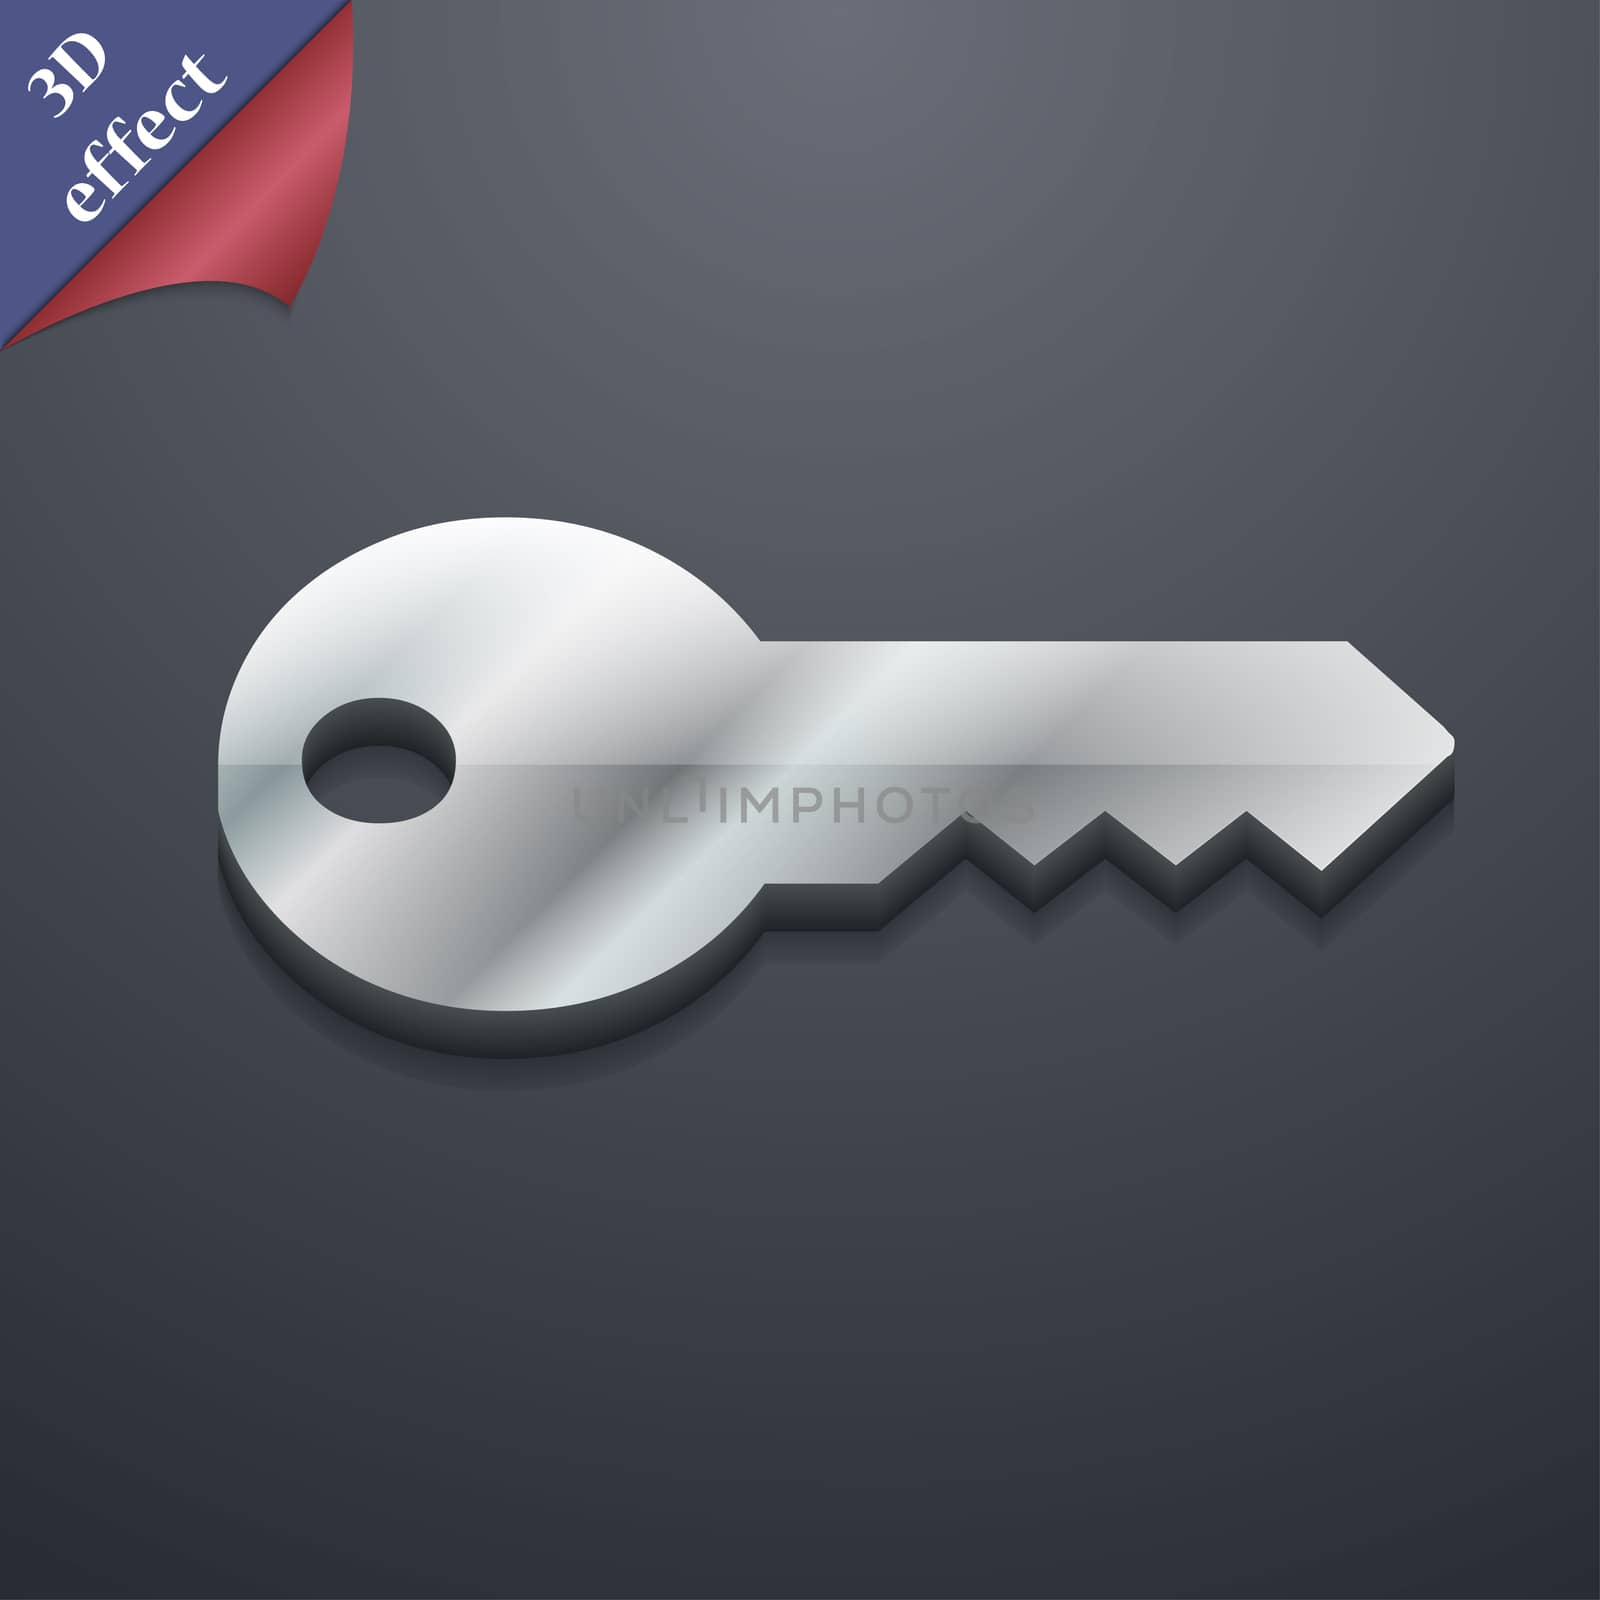 key icon symbol. 3D style. Trendy, modern design with space for your text illustration. Rastrized copy